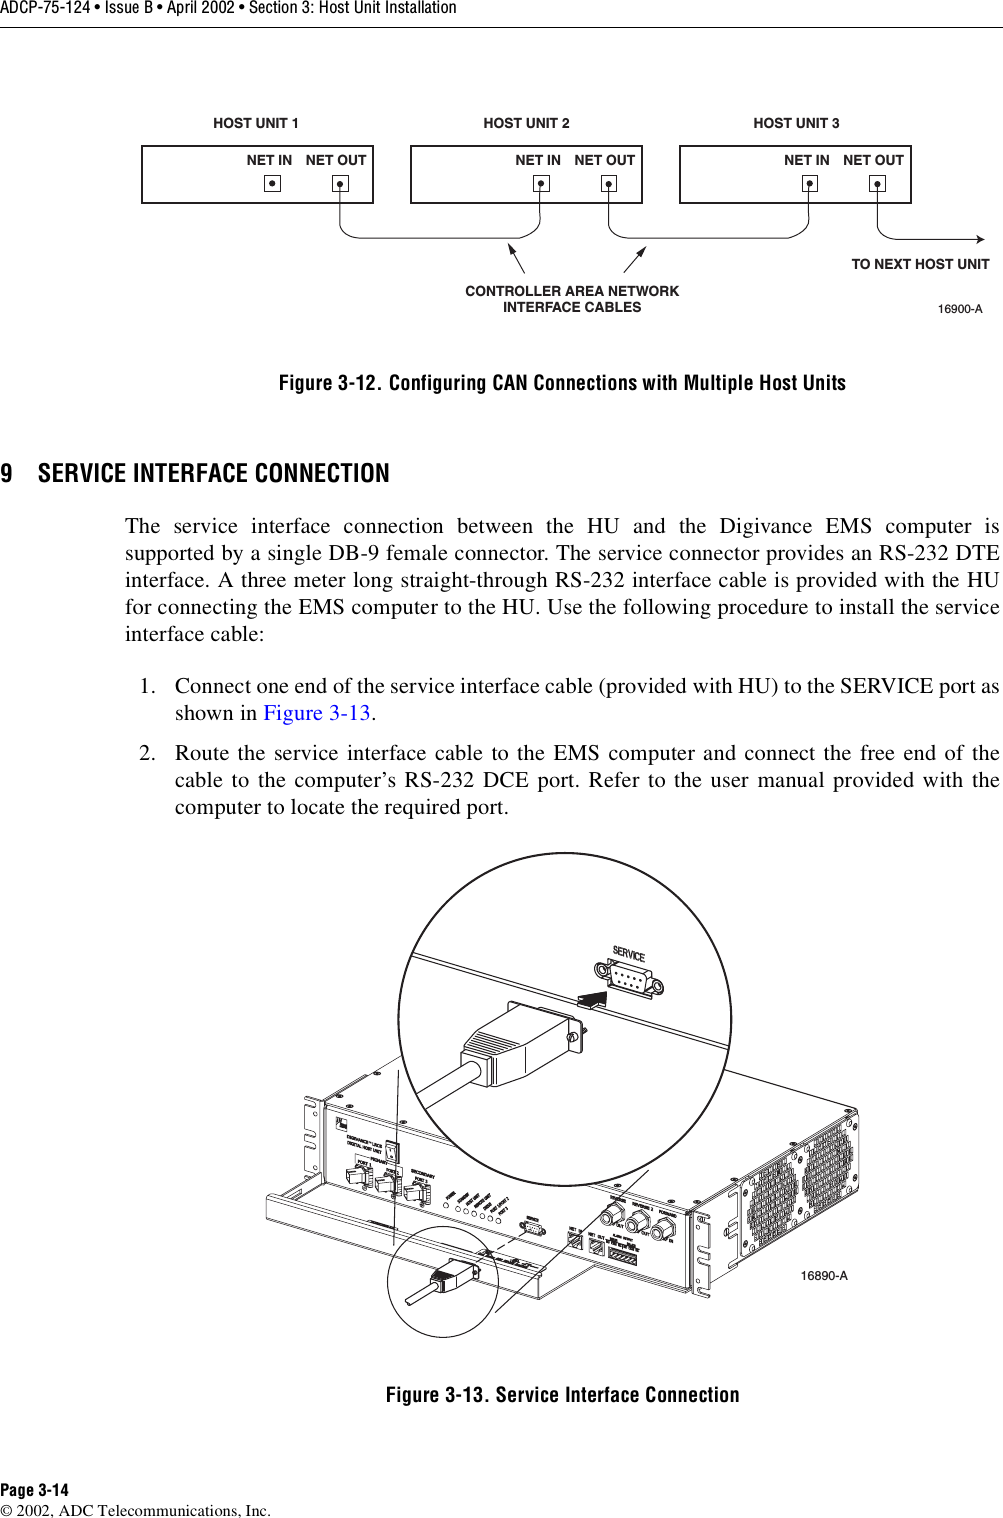 ADCP-75-124 • Issue B • April 2002 • Section 3: Host Unit InstallationPage 3-14©2002, ADC Telecommunications, Inc.Figure 3-12. Configuring CAN Connections with Multiple Host Units9 SERVICE INTERFACE CONNECTIONThe service interface connection between the HU and the Digivance EMS computer issupported by asingle DB-9 female connector. The service connector provides an RS-232 DTEinterface. Athree meter long straight-through RS-232 interface cable is provided with the HUfor connecting the EMS computer to the HU. Use the following procedure to install the serviceinterface cable:1. Connect one end of the service interface cable (provided with HU) to the SERVICE port asshown in Figure 3-13.2. Route the service interface cable to the EMS computer and connect the free end of thecable to the computer’s RS-232 DCE port. Refer to the user manual provided with thecomputer to locate the required port.Figure 3-13. Service Interface ConnectionHOST UNIT 1 HOST UNIT 2 HOST UNIT 3NET IN NET OUT NET IN NET OUT NET IN NET OUT16900-ACONTROLLER AREA NETWORKINTERFACE CABLESTO NEXT HOST UNIT16890-A